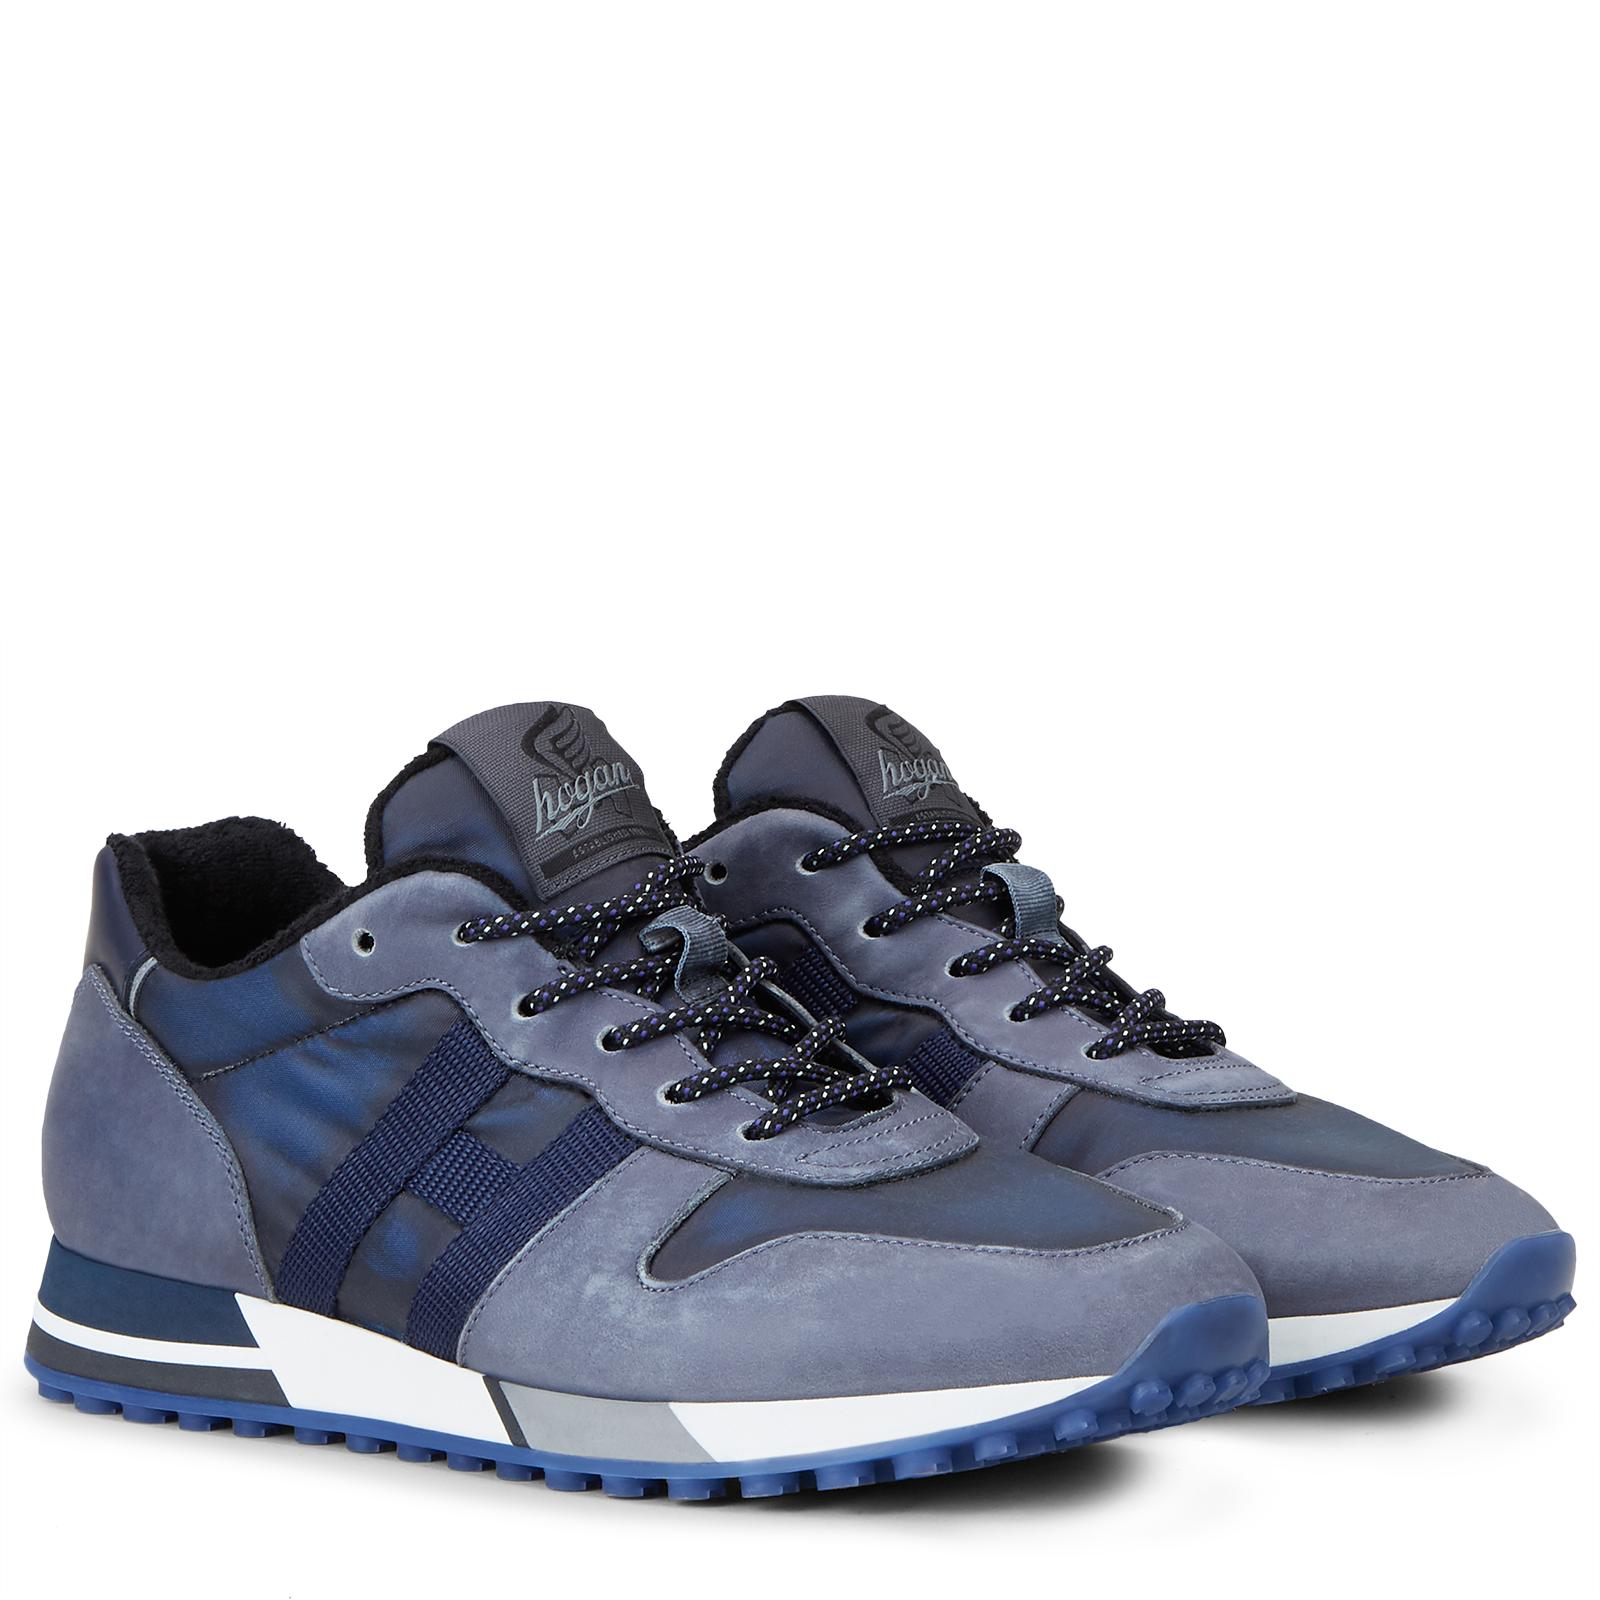 Hogan Leather Sneakers H383 in Blue for Men - Lyst